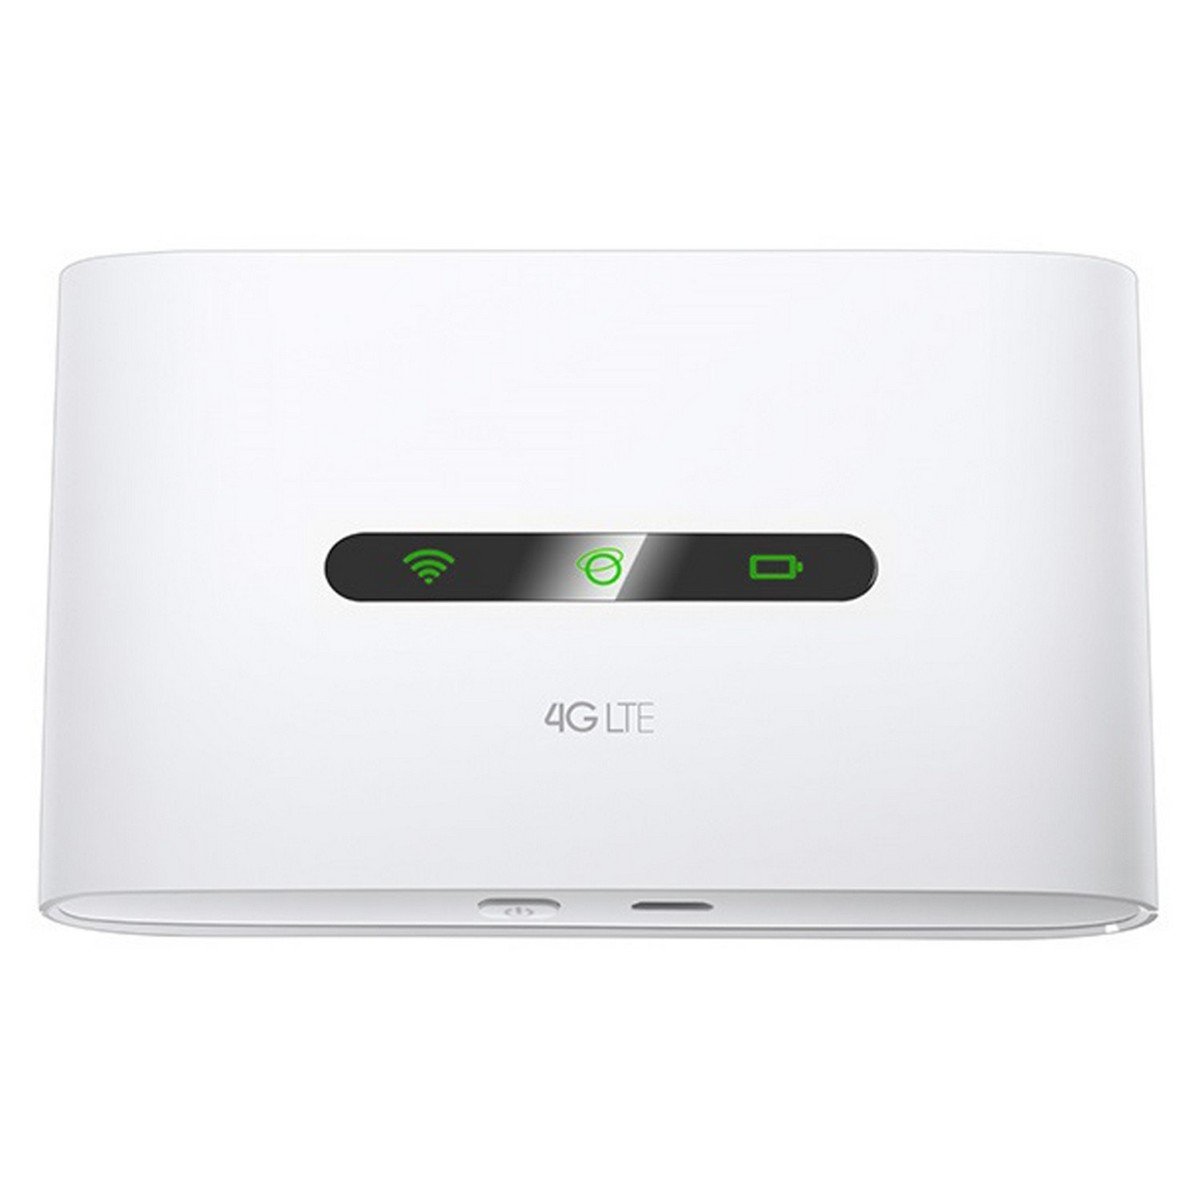 TP-Link 4G LTE Advanced Mobile Wi-Fi Router M7300